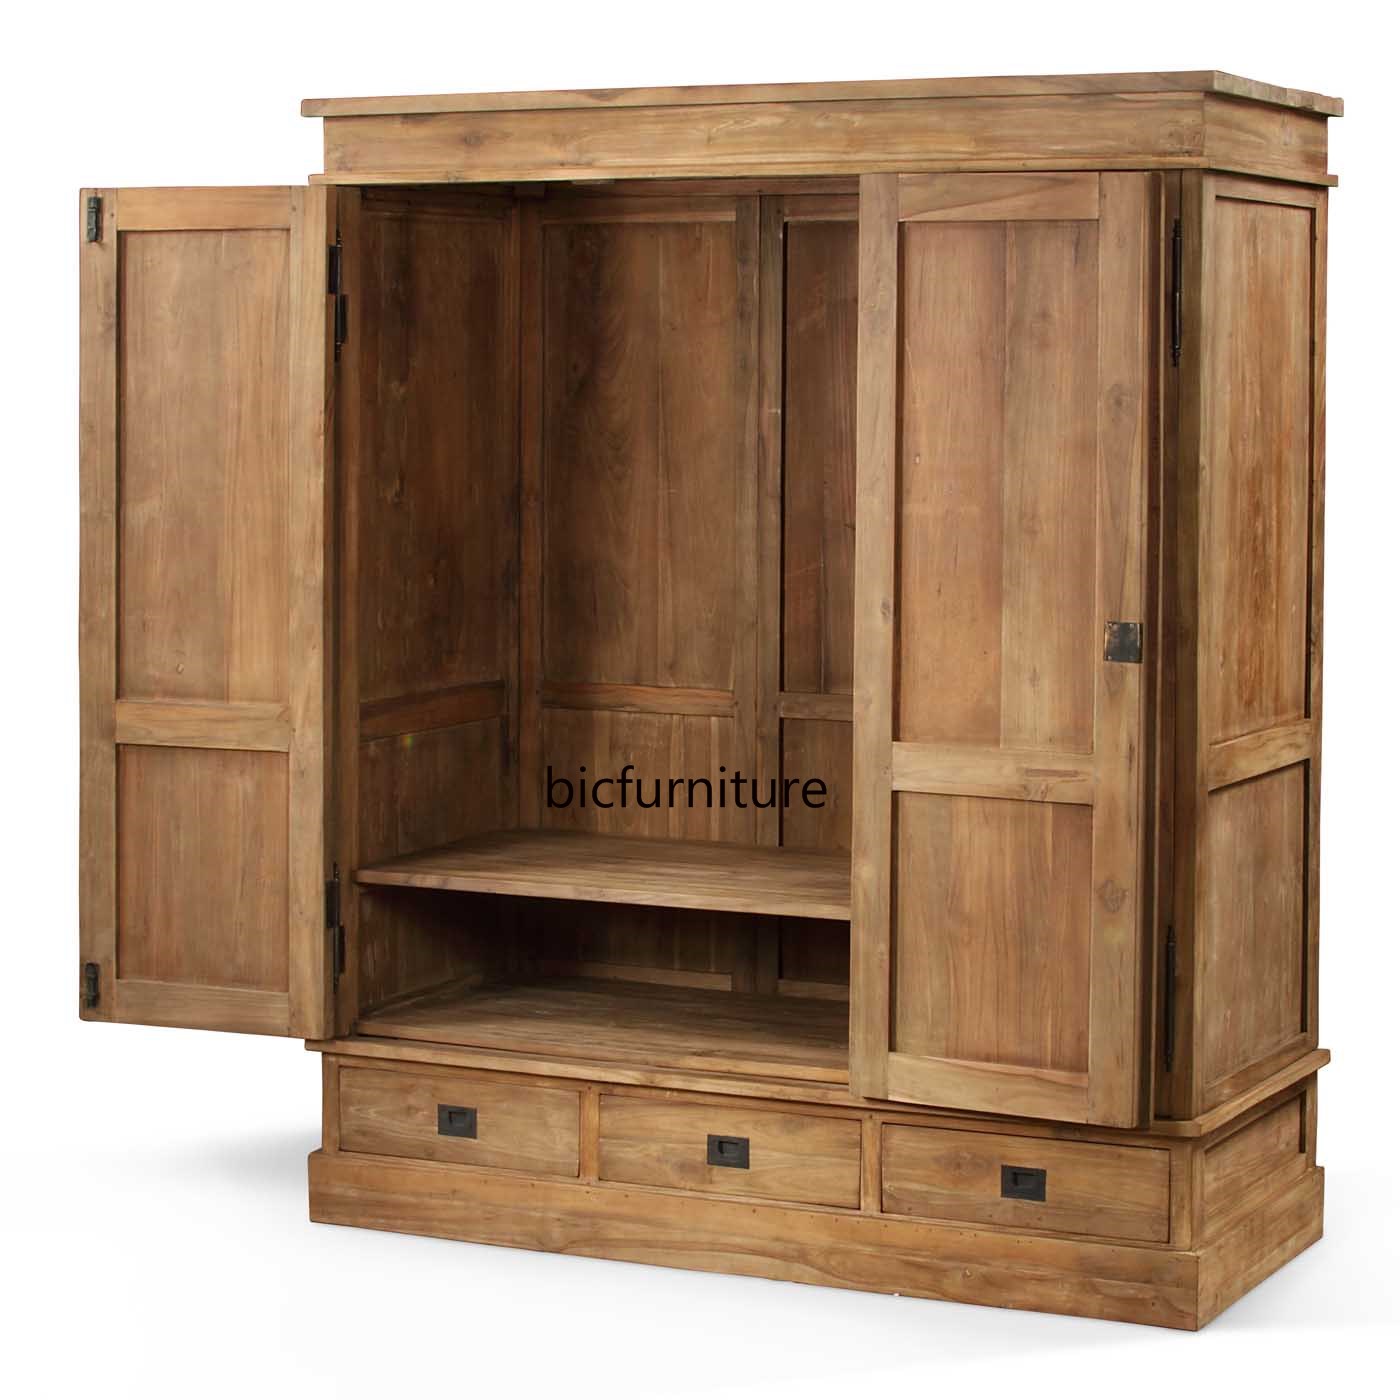 Amazing Wood Wardrobe Pictures wooden wardrobe with drawers